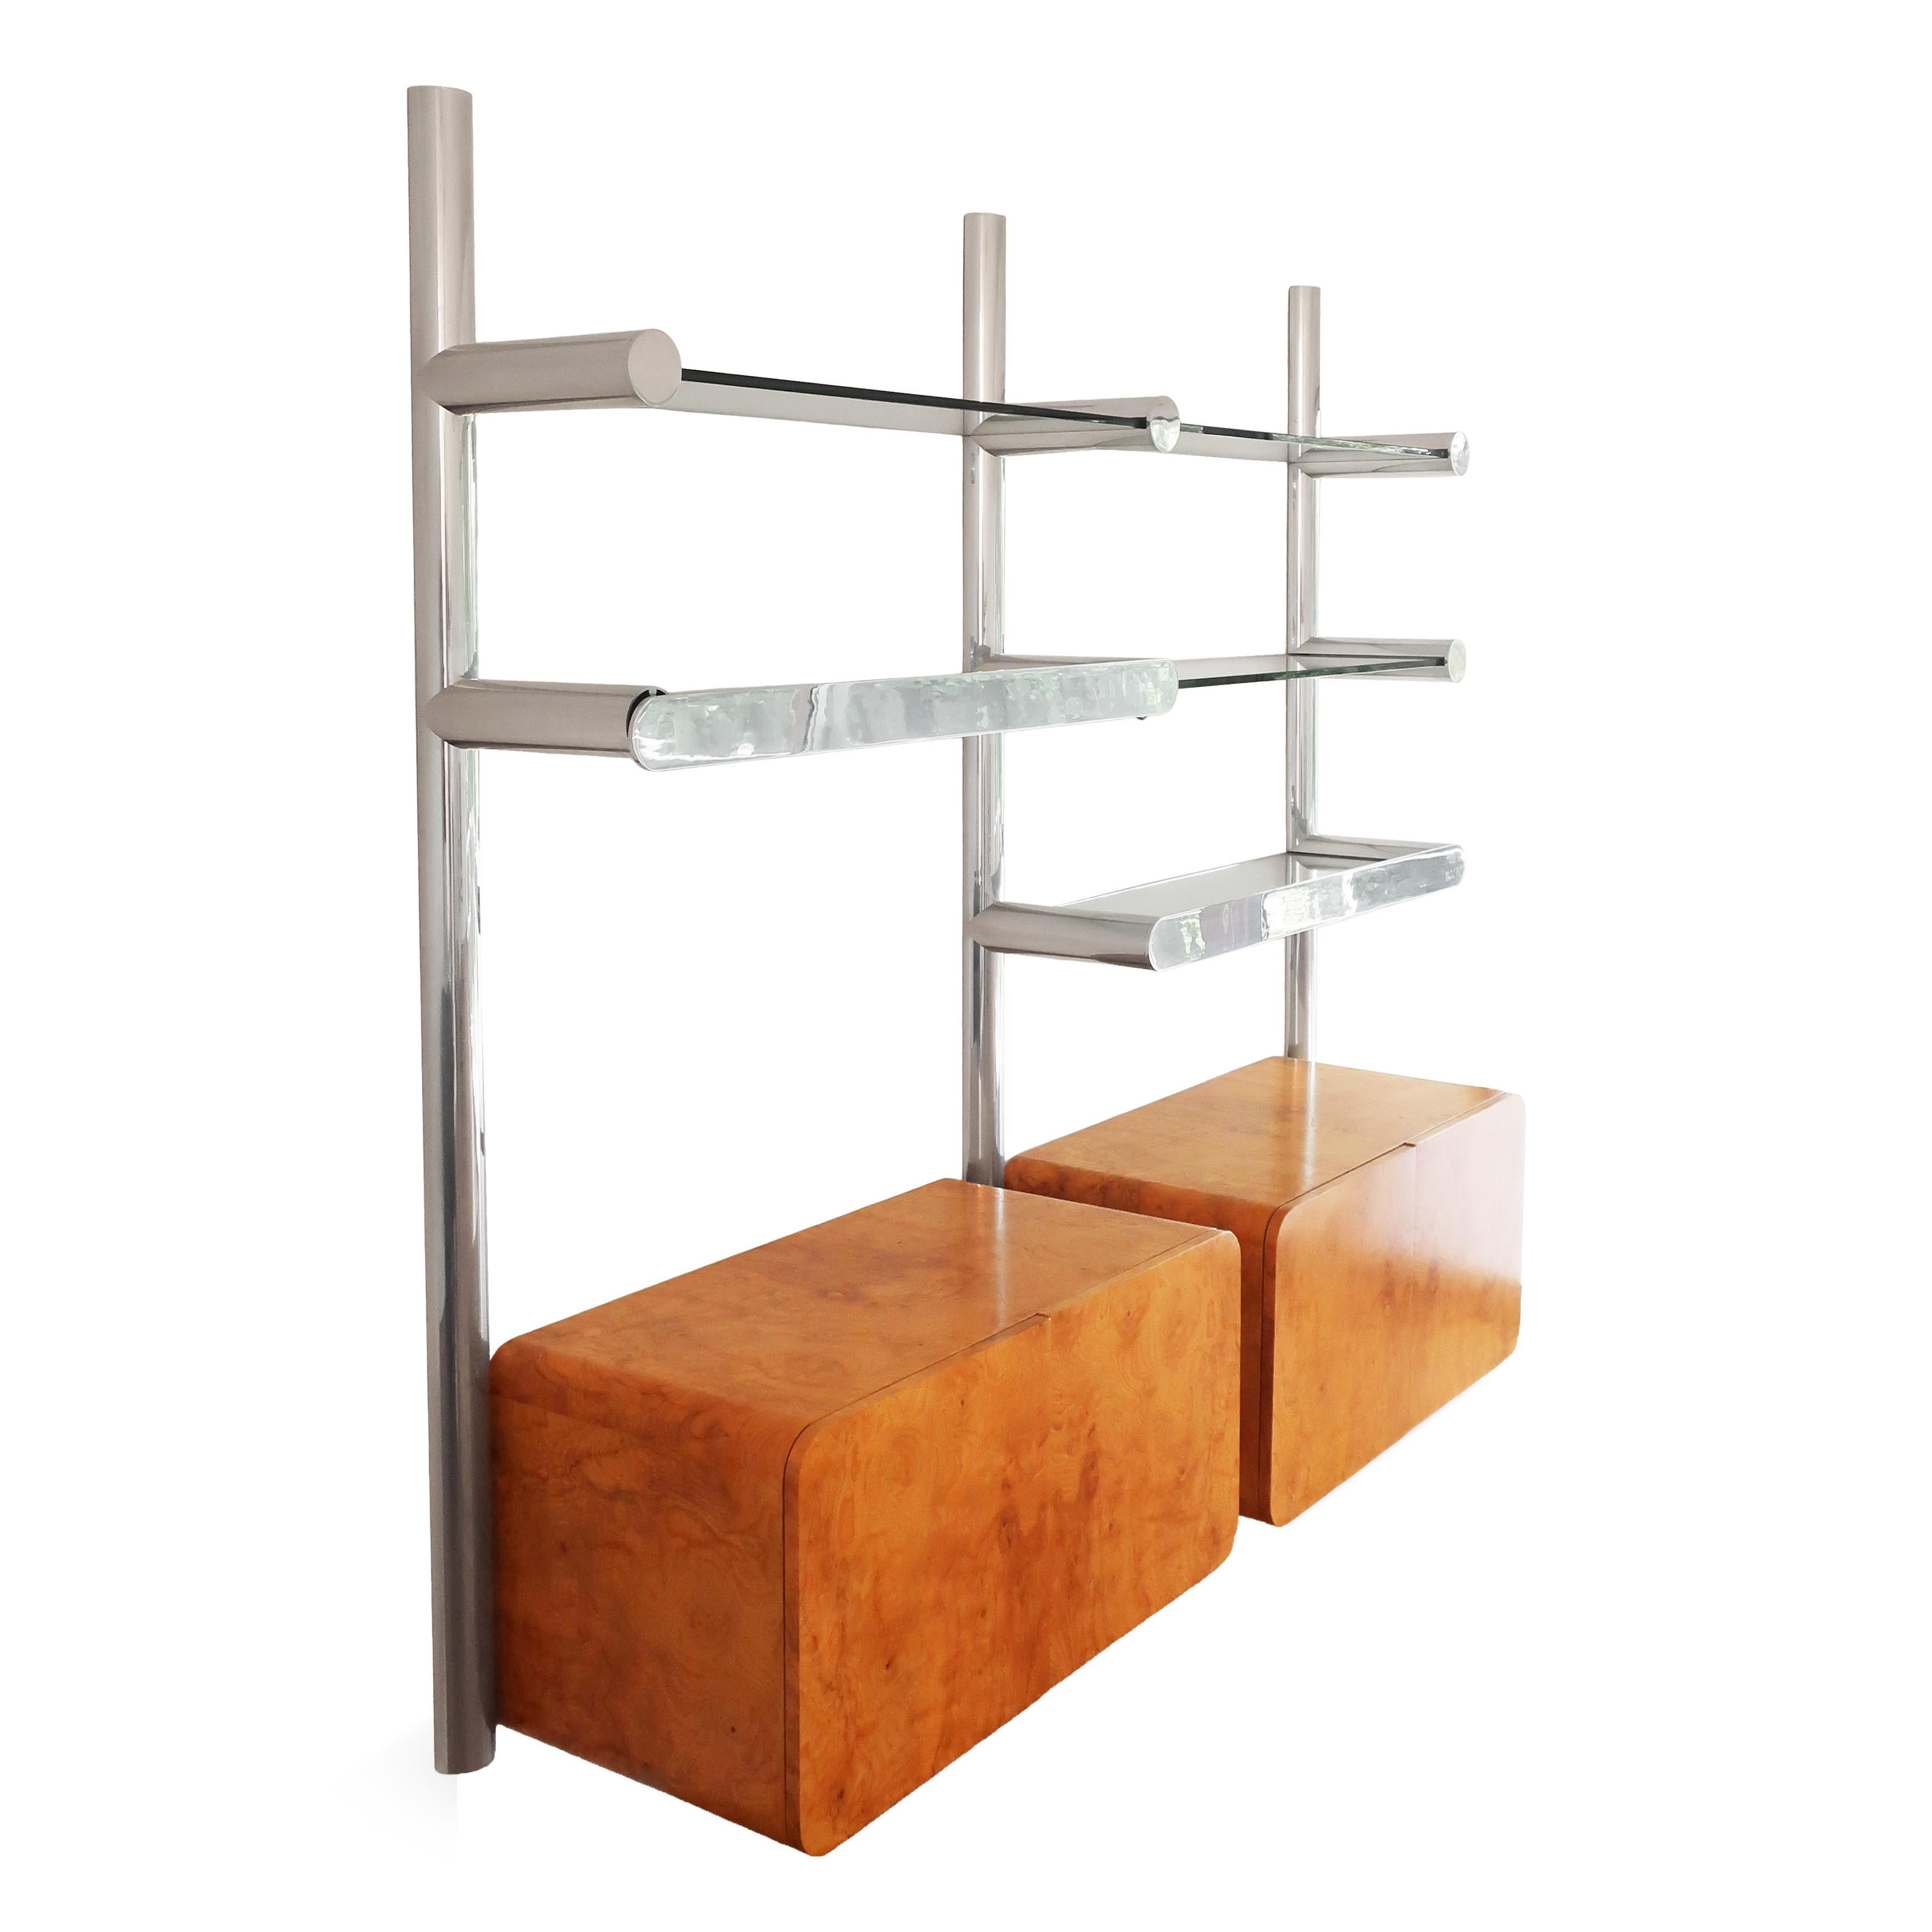 Post-Modern 1970s Aluminum and Glass Orba Wall Unit by Janet Schweitzer for Pace Collection For Sale